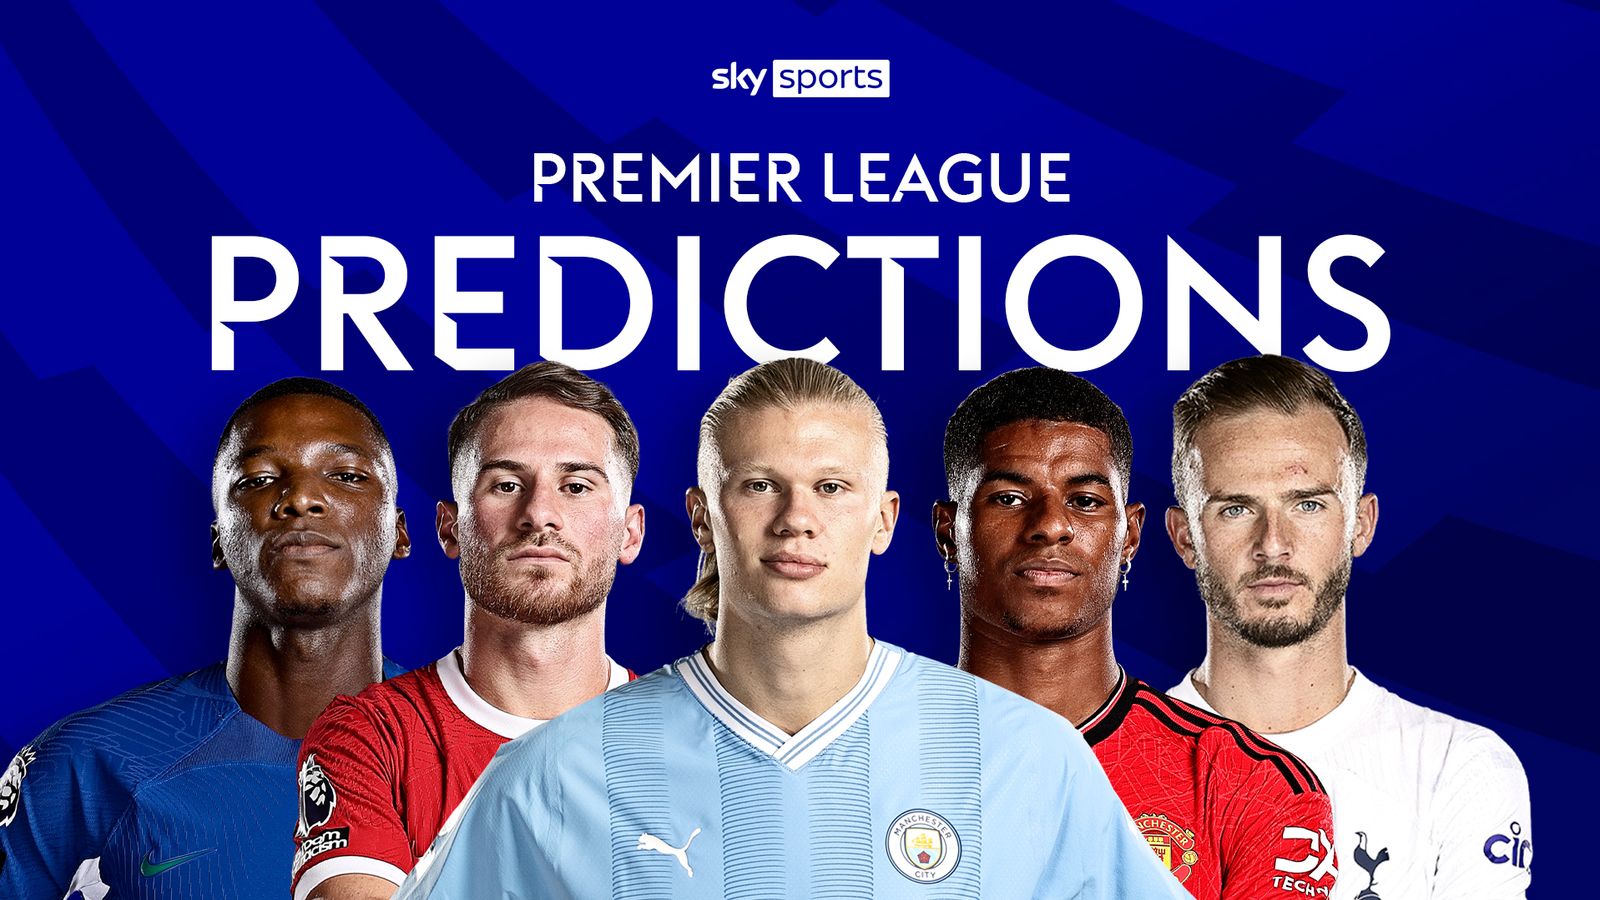 Premier League predictions: Goals to flow in Arsenal vs Man Utd and Ebe Eze to fire for Palace | Football News